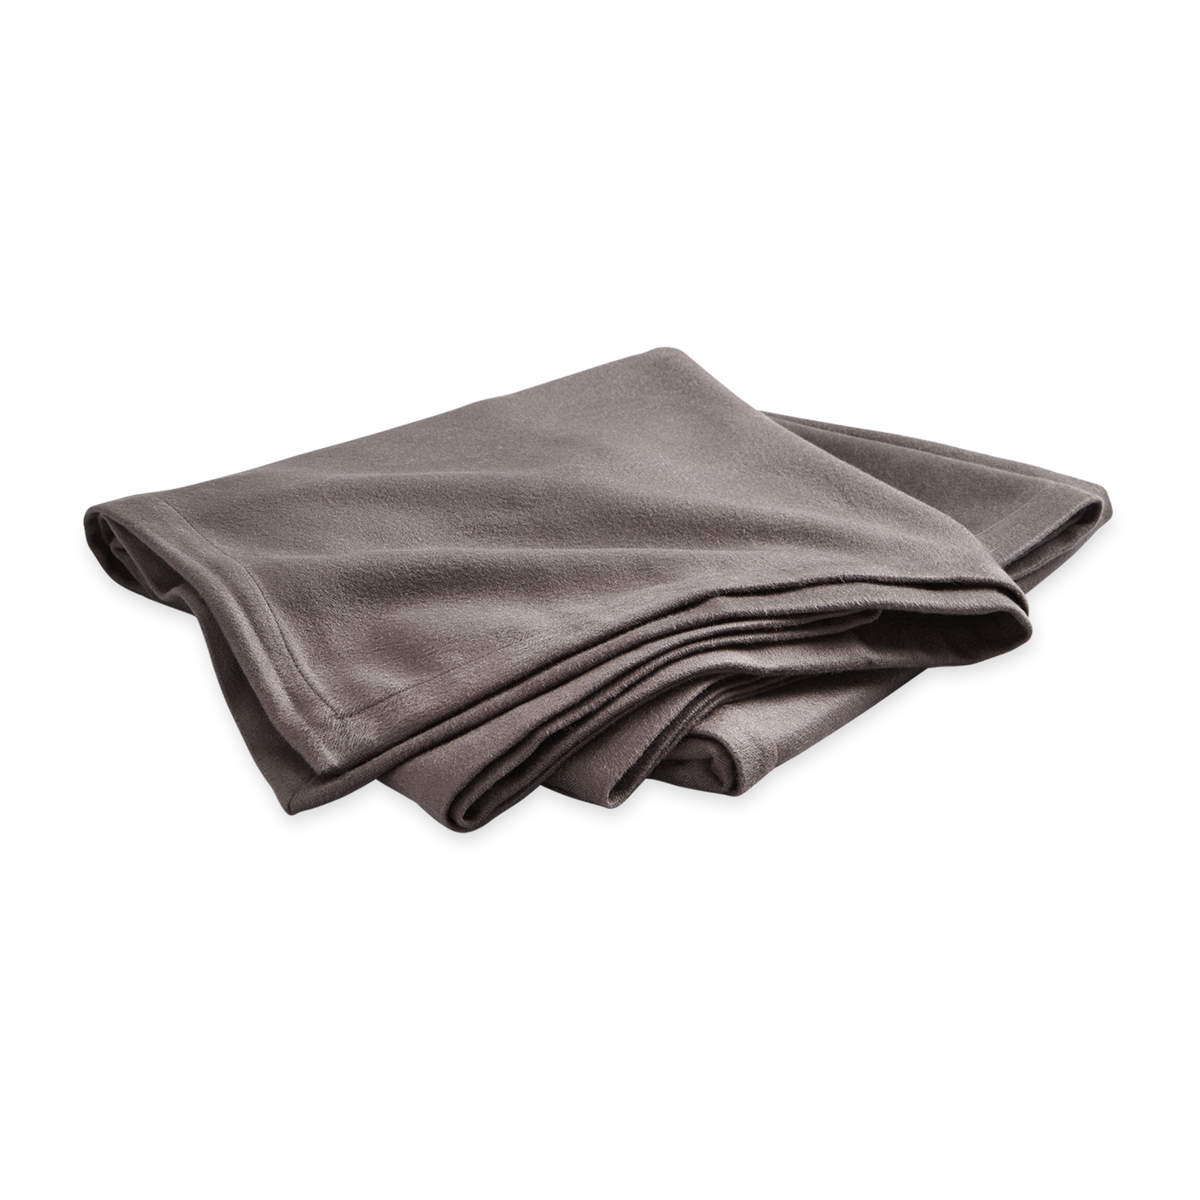 Folded Throw of Matouk Dream Modal Collection in Charcoal Color